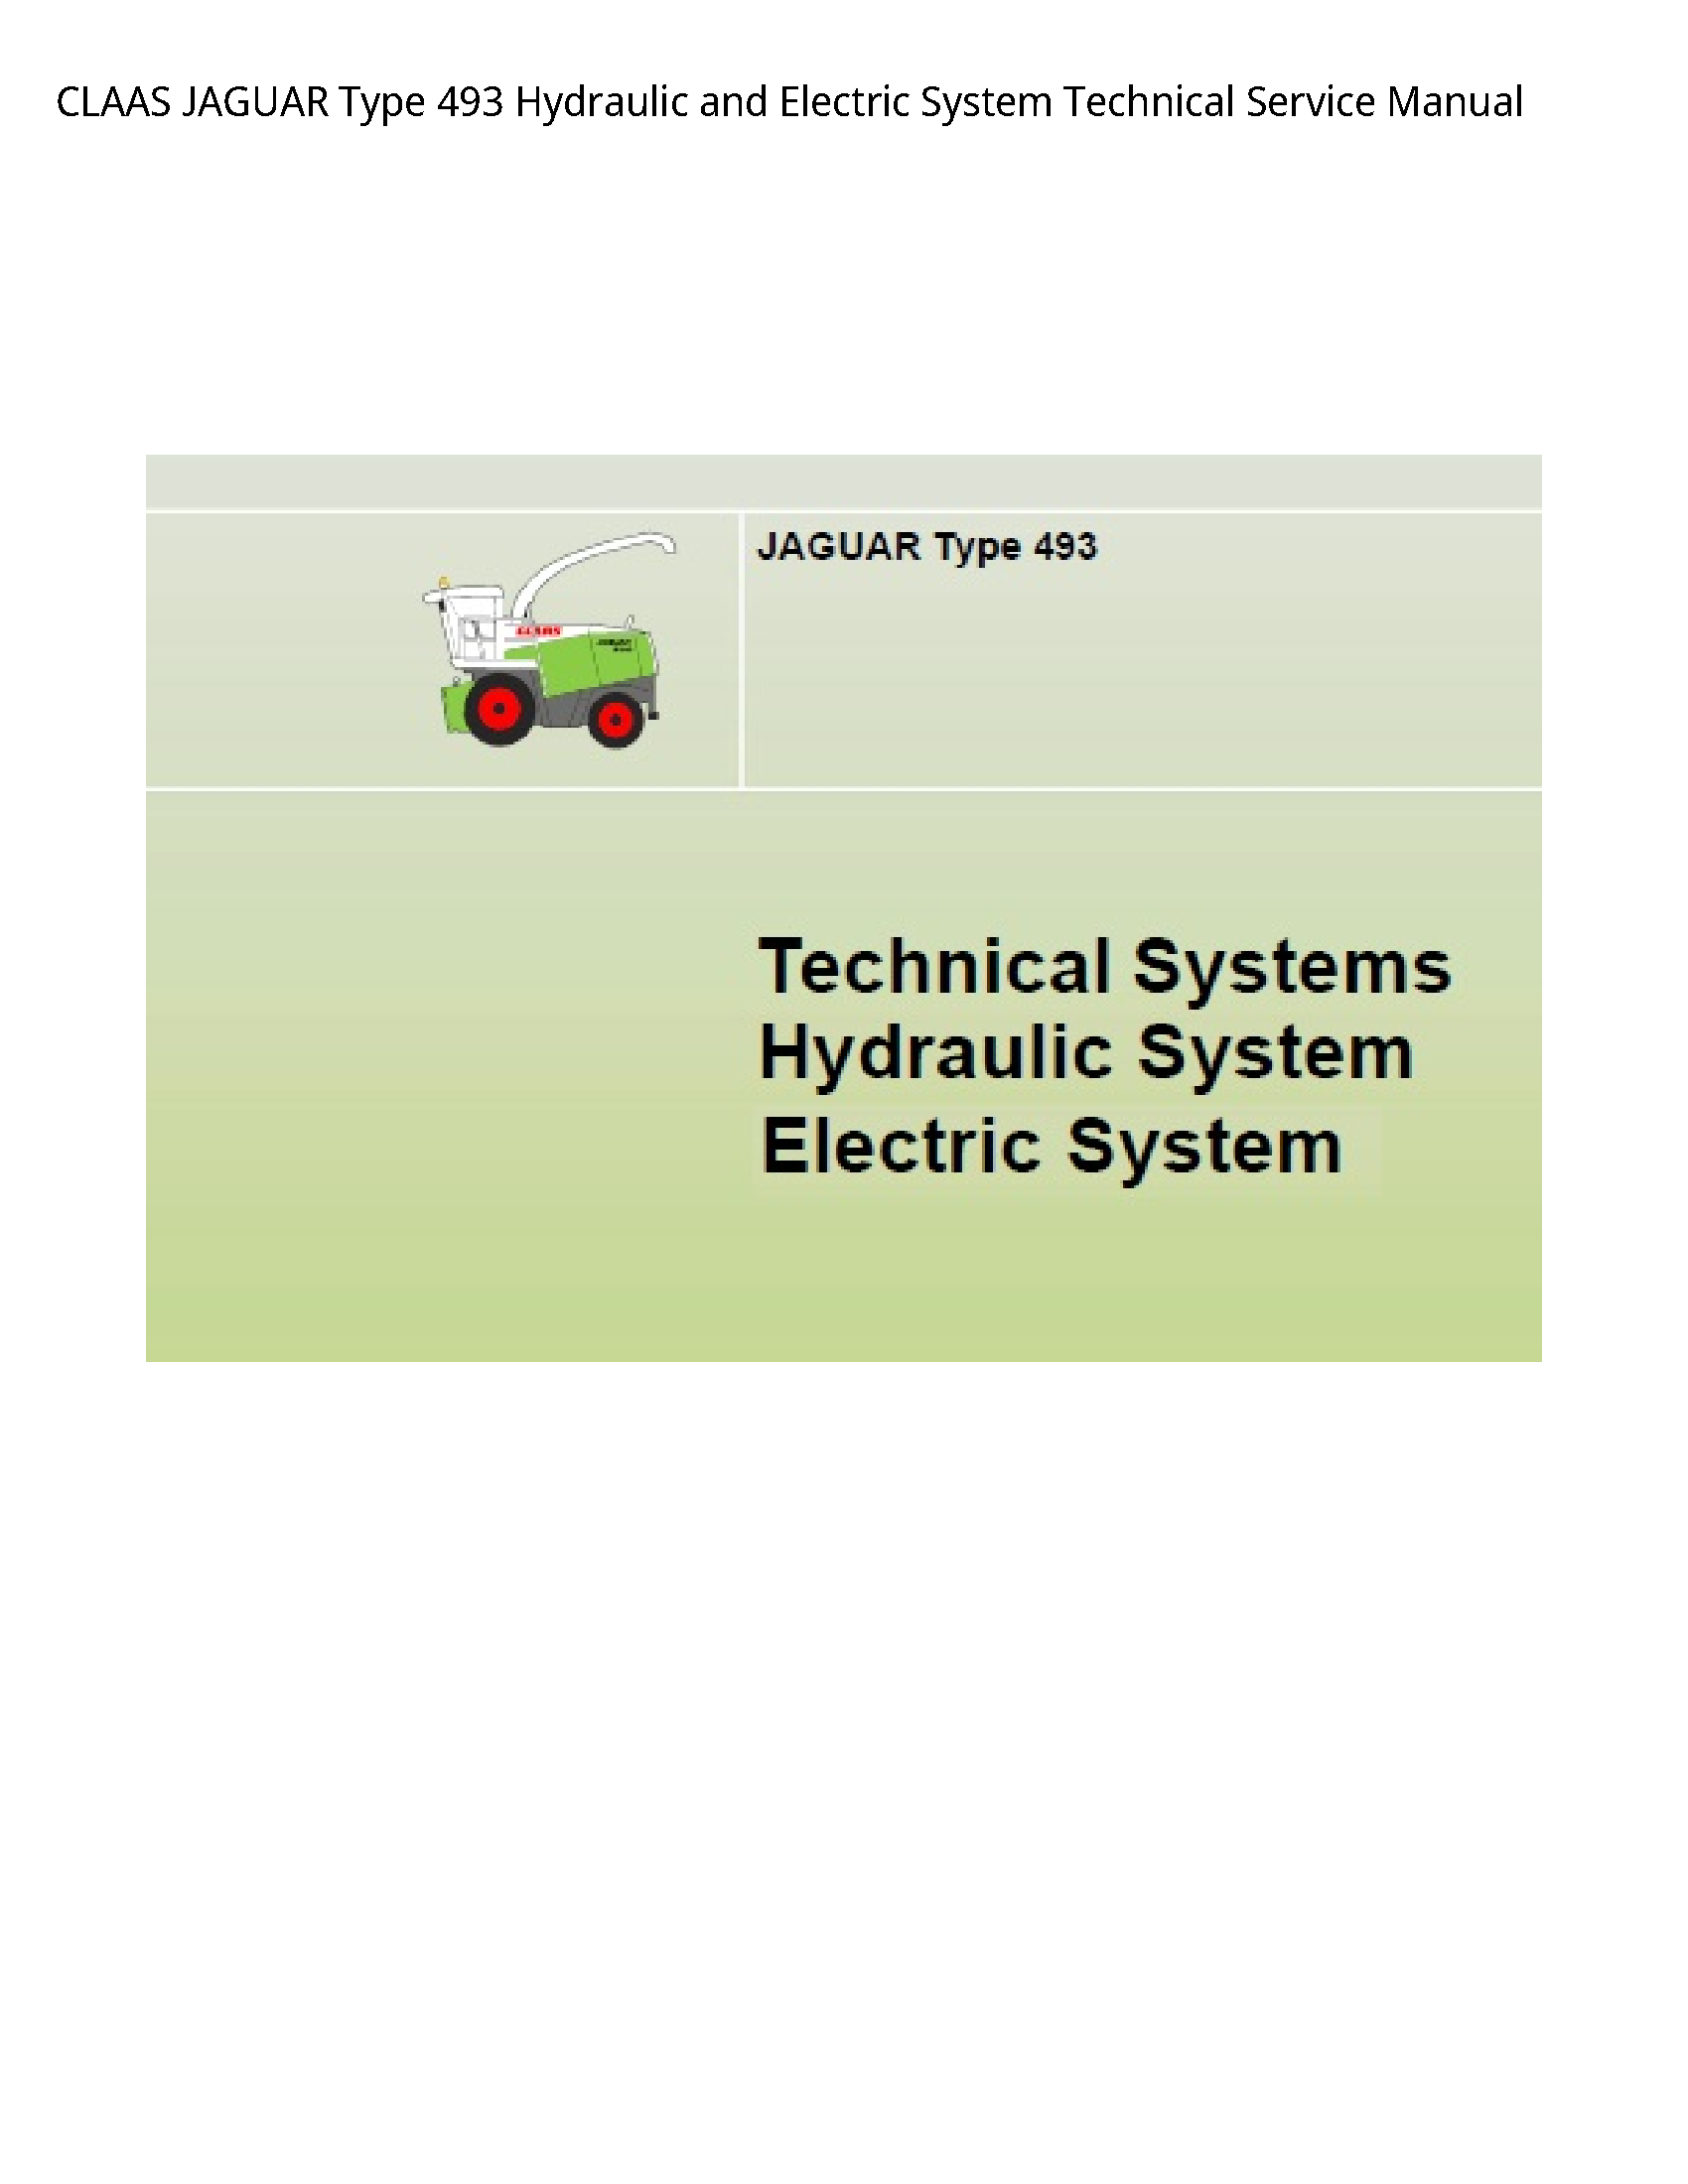 Claas 493 JAGUAR Type Hydraulic  Electric System Technical Service manual